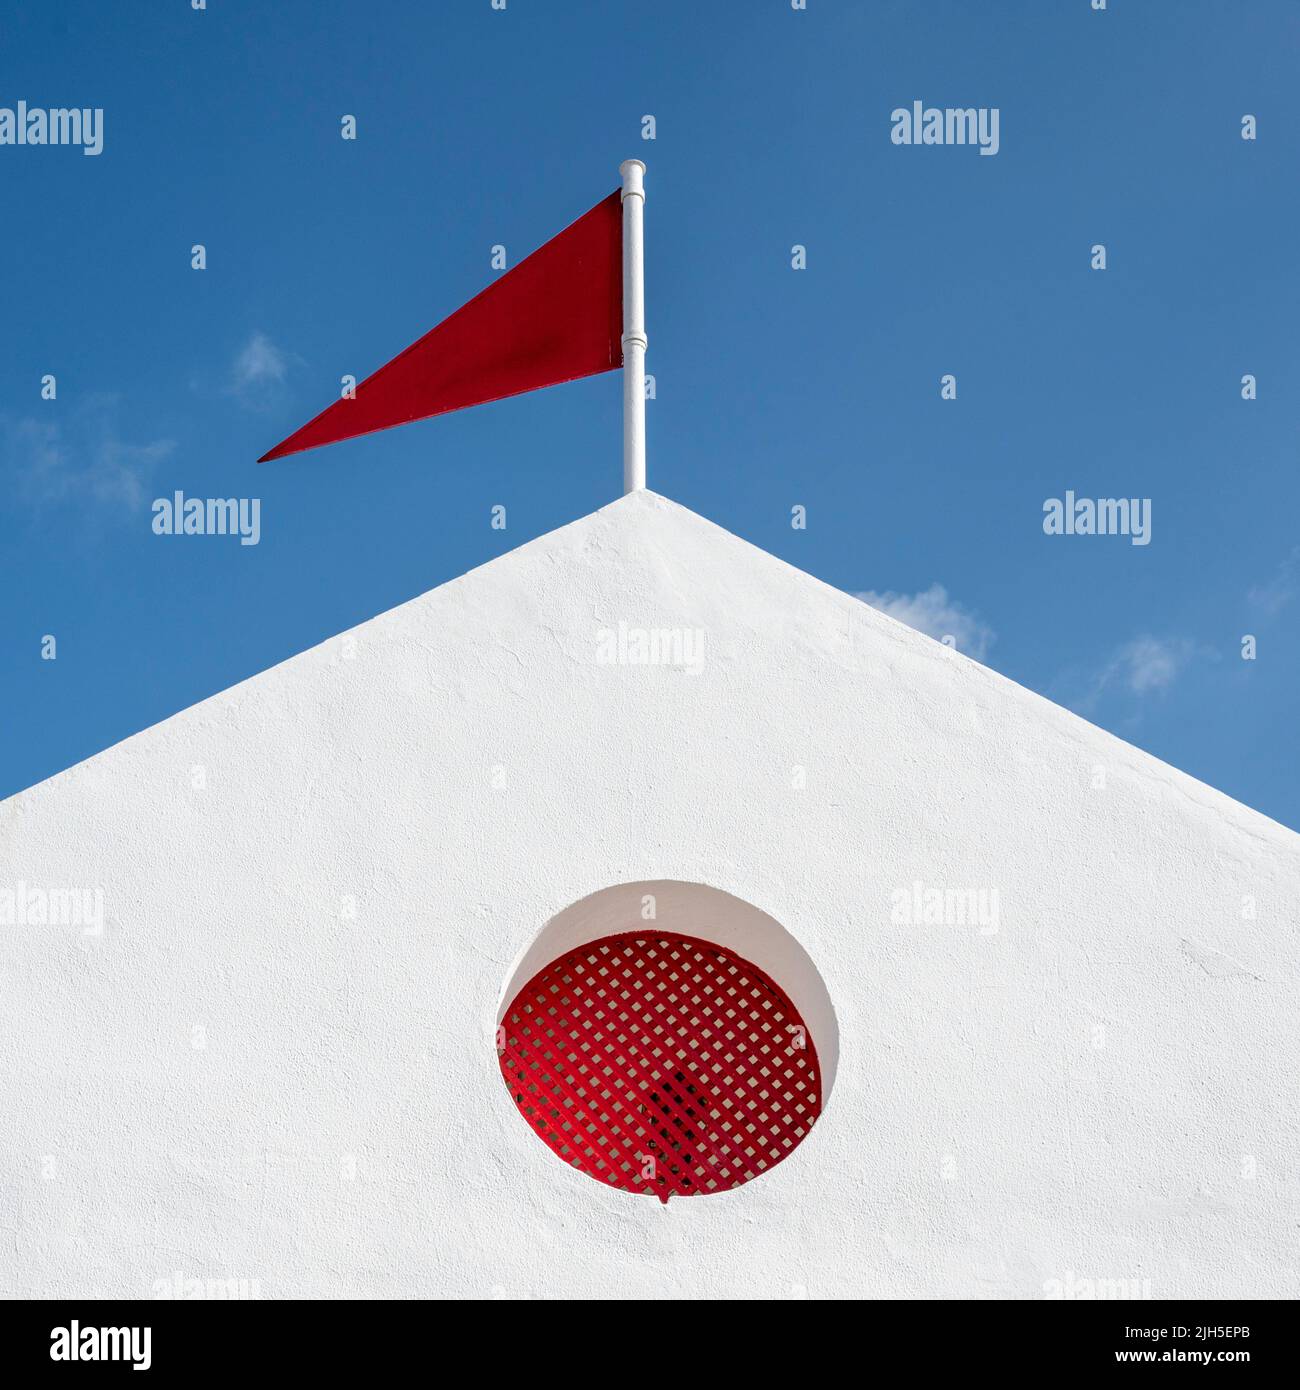 A red flag on a building in Spain against a blue sky in a colourful image of urban architecture Stock Photo